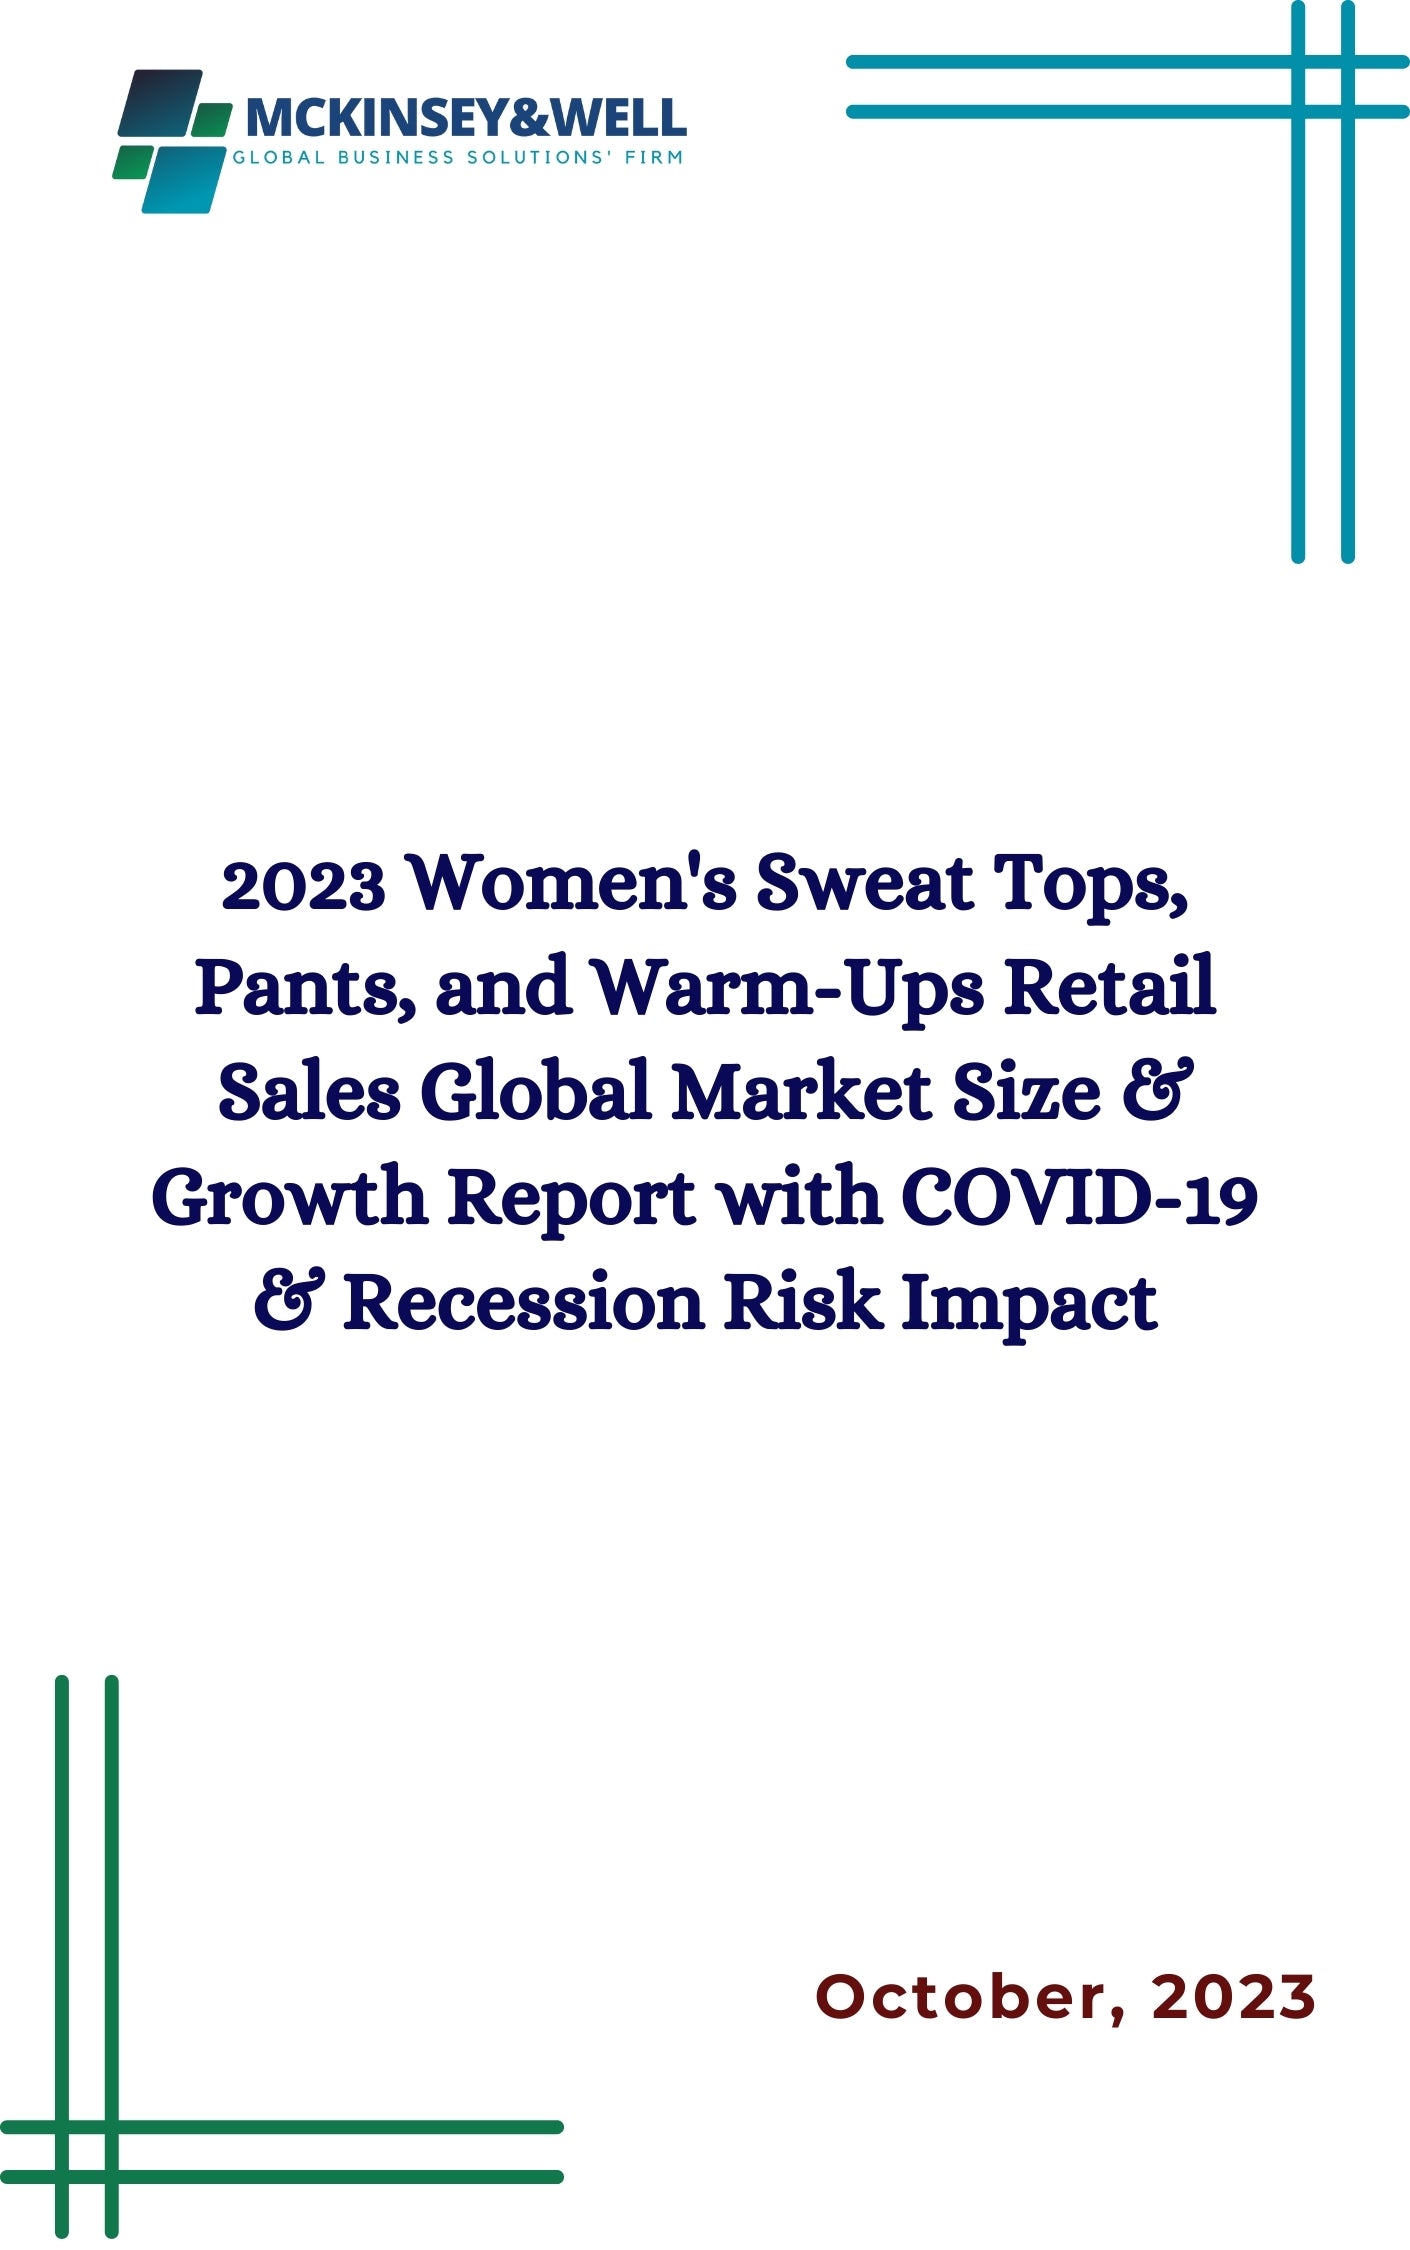 2023 Women's Sweat Tops, Pants, and Warm-Ups Retail Sales Global Market Size & Growth Report with COVID-19 & Recession Risk Impact